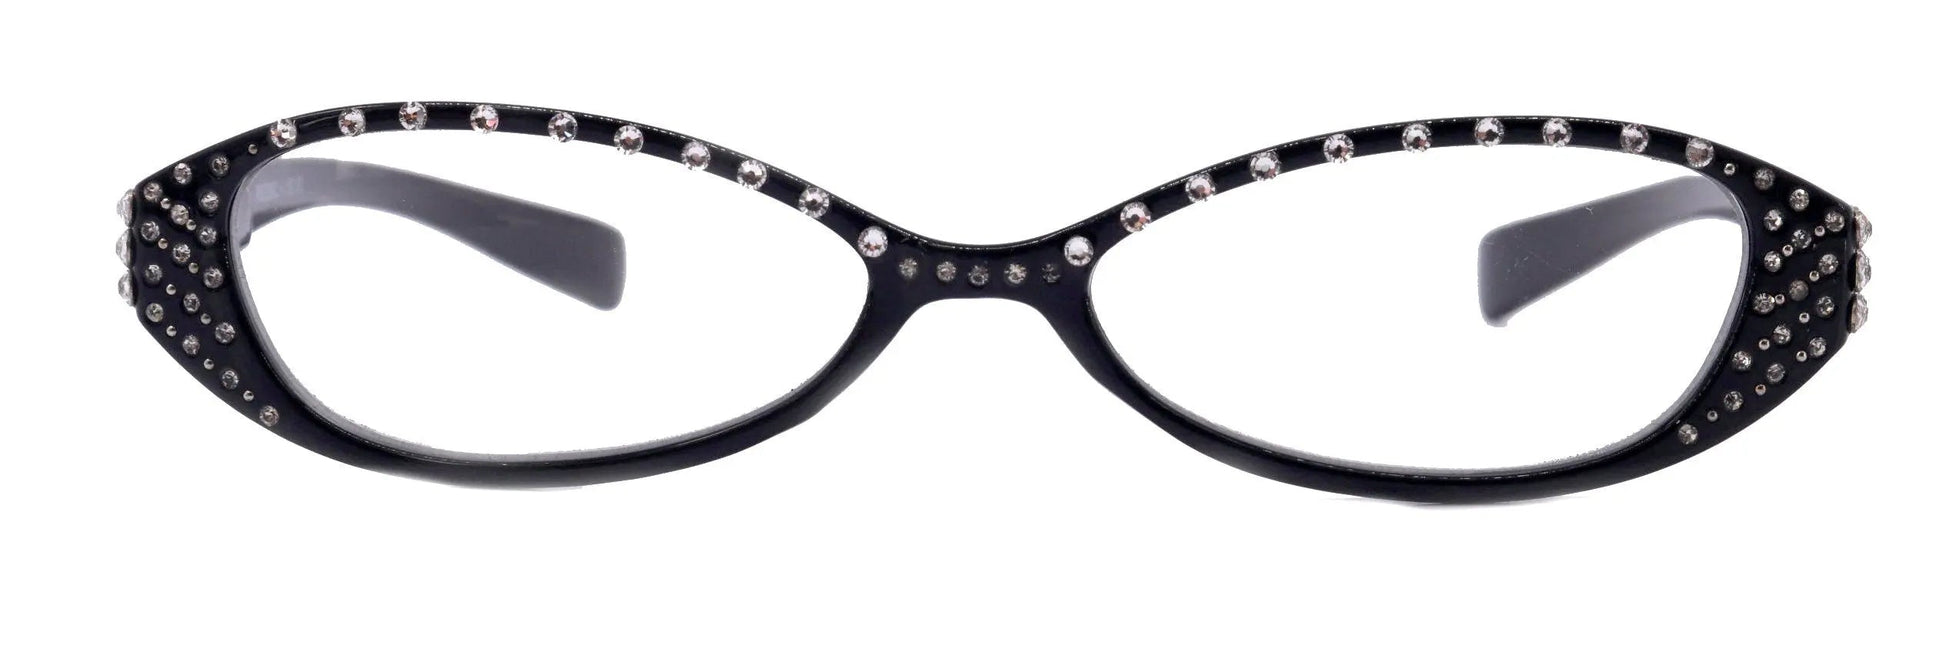 Lucky, (Bling) Women Reading Glasses W (Clear) Genuine European Crystals, Magnifying, Cat Eyes (Black) Cat eye NY Fifth Avenue 